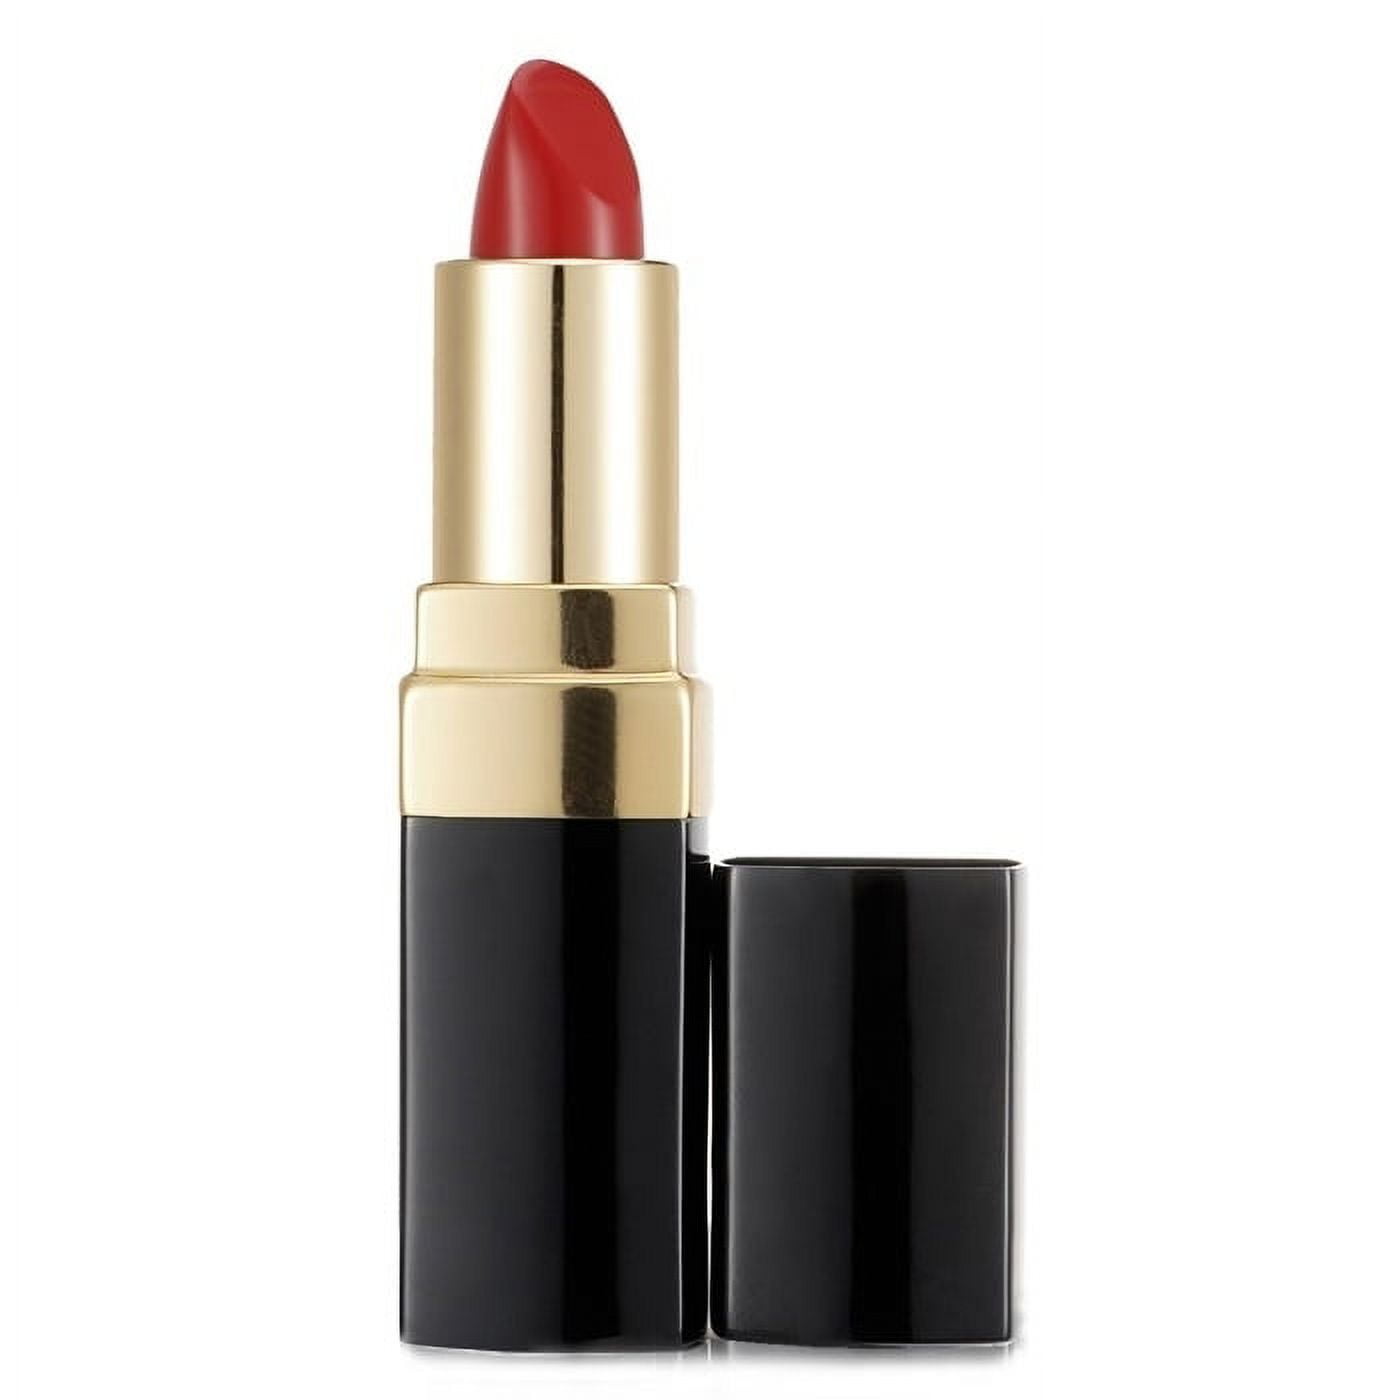 Chanel Rouge Coco Ultra Hydrating Lip Colour - # 416 Coco 3.5g